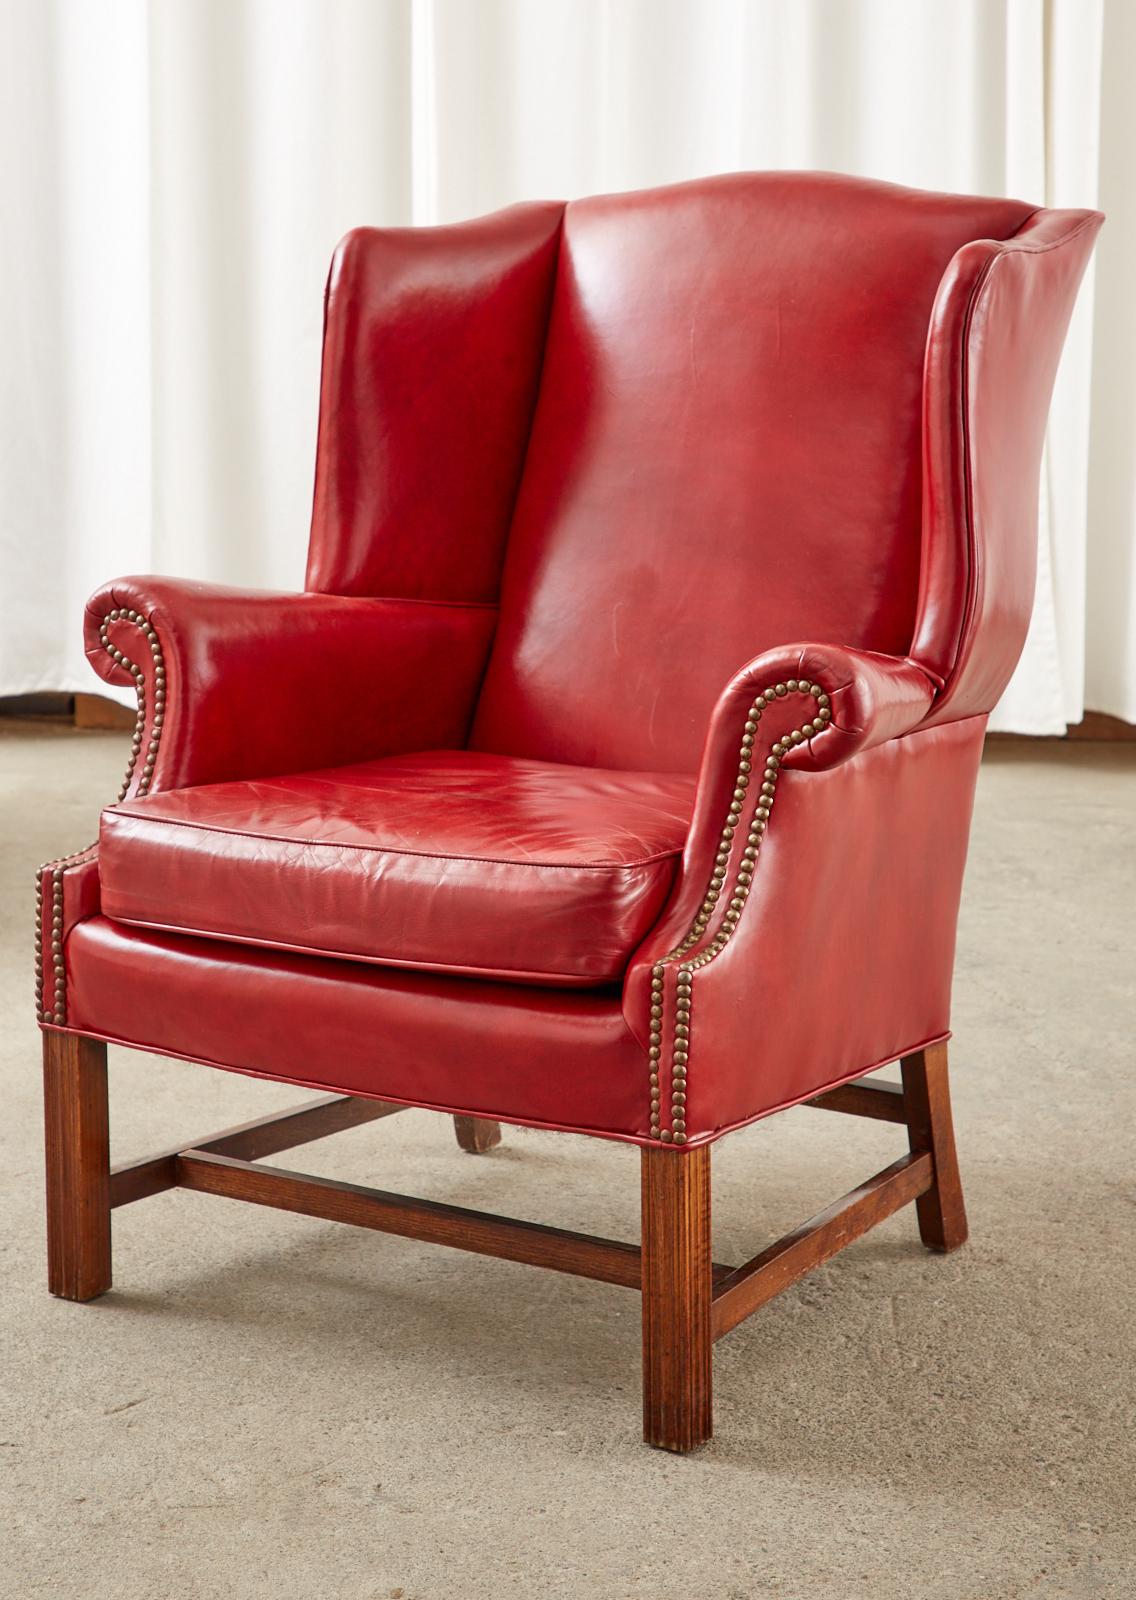 Pair of English Georgian Style Ruby Red Leather Wingback Chairs In Good Condition For Sale In Rio Vista, CA